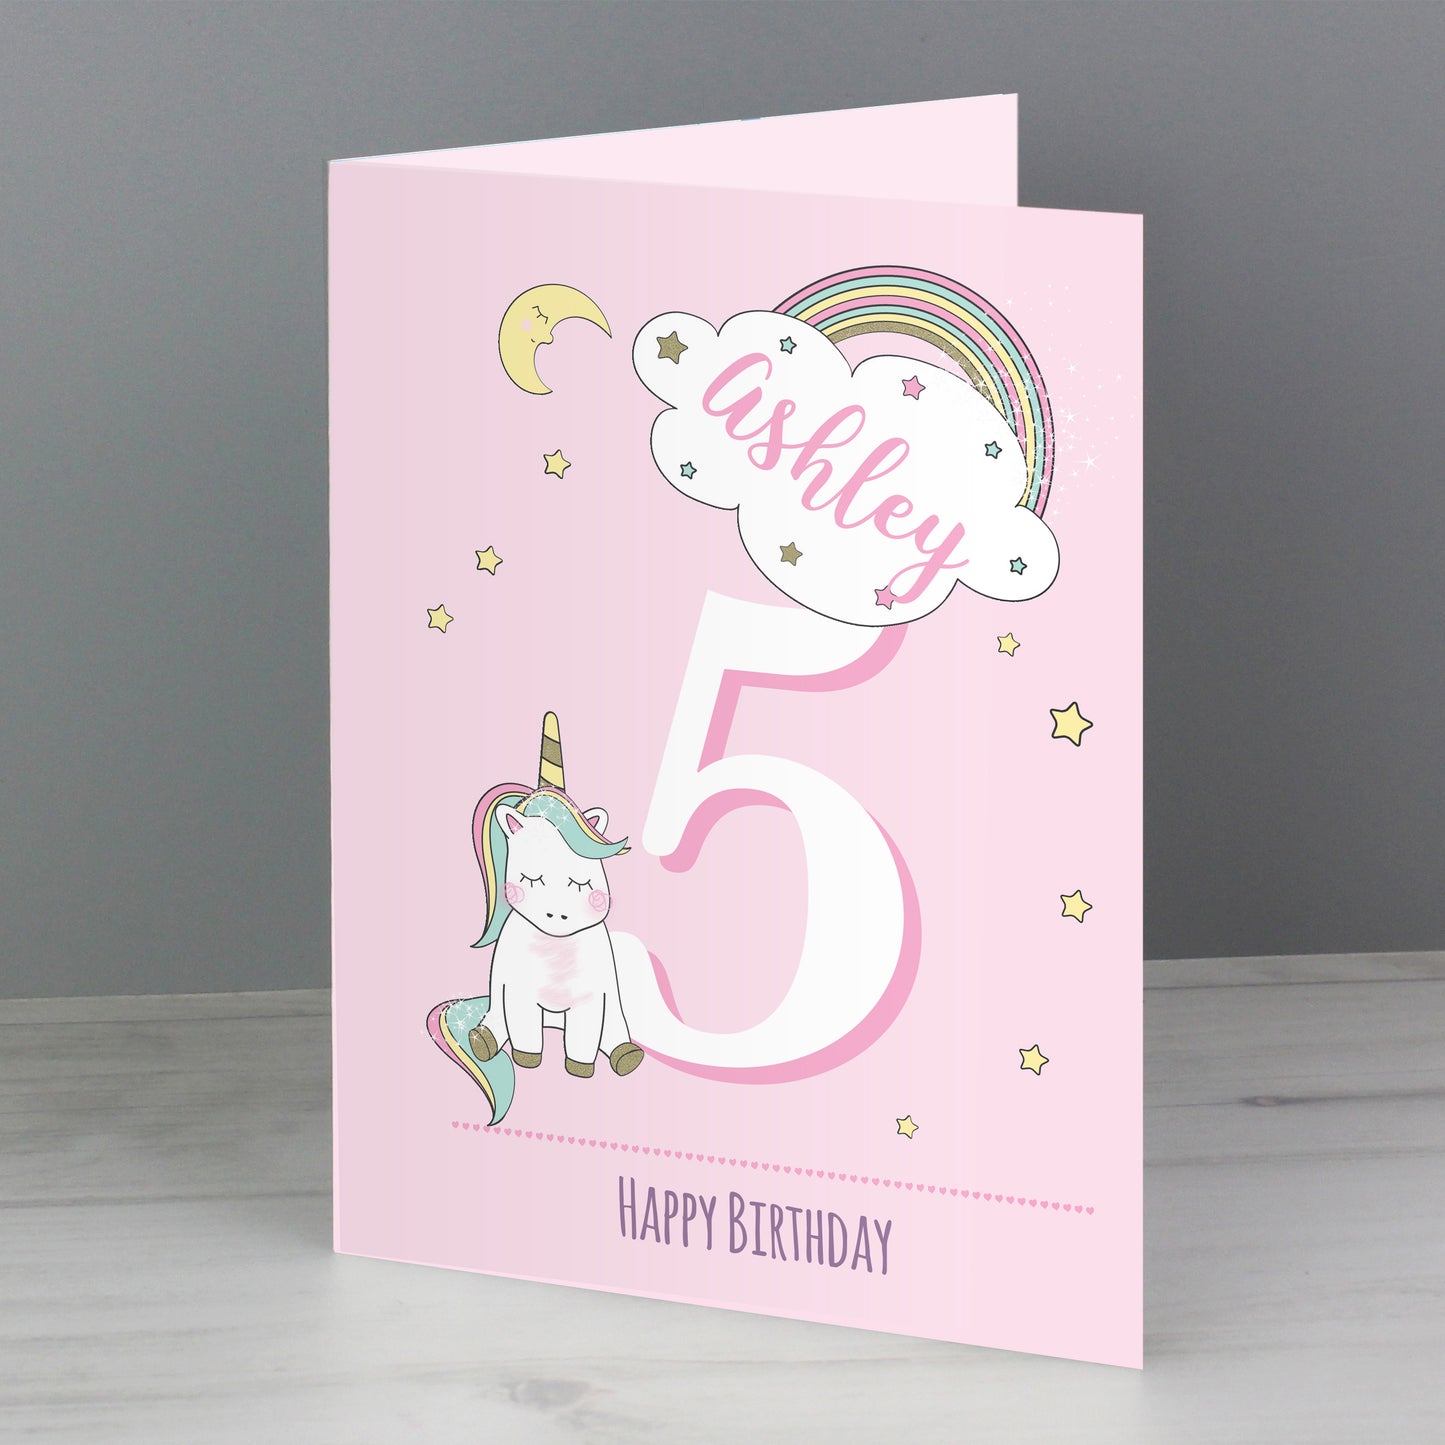 Personalised Baby Unicorn Birthday Card - FREE STANDARD UK DELIVERY! - Violet Belle Gifts - Personalised Greeting Card